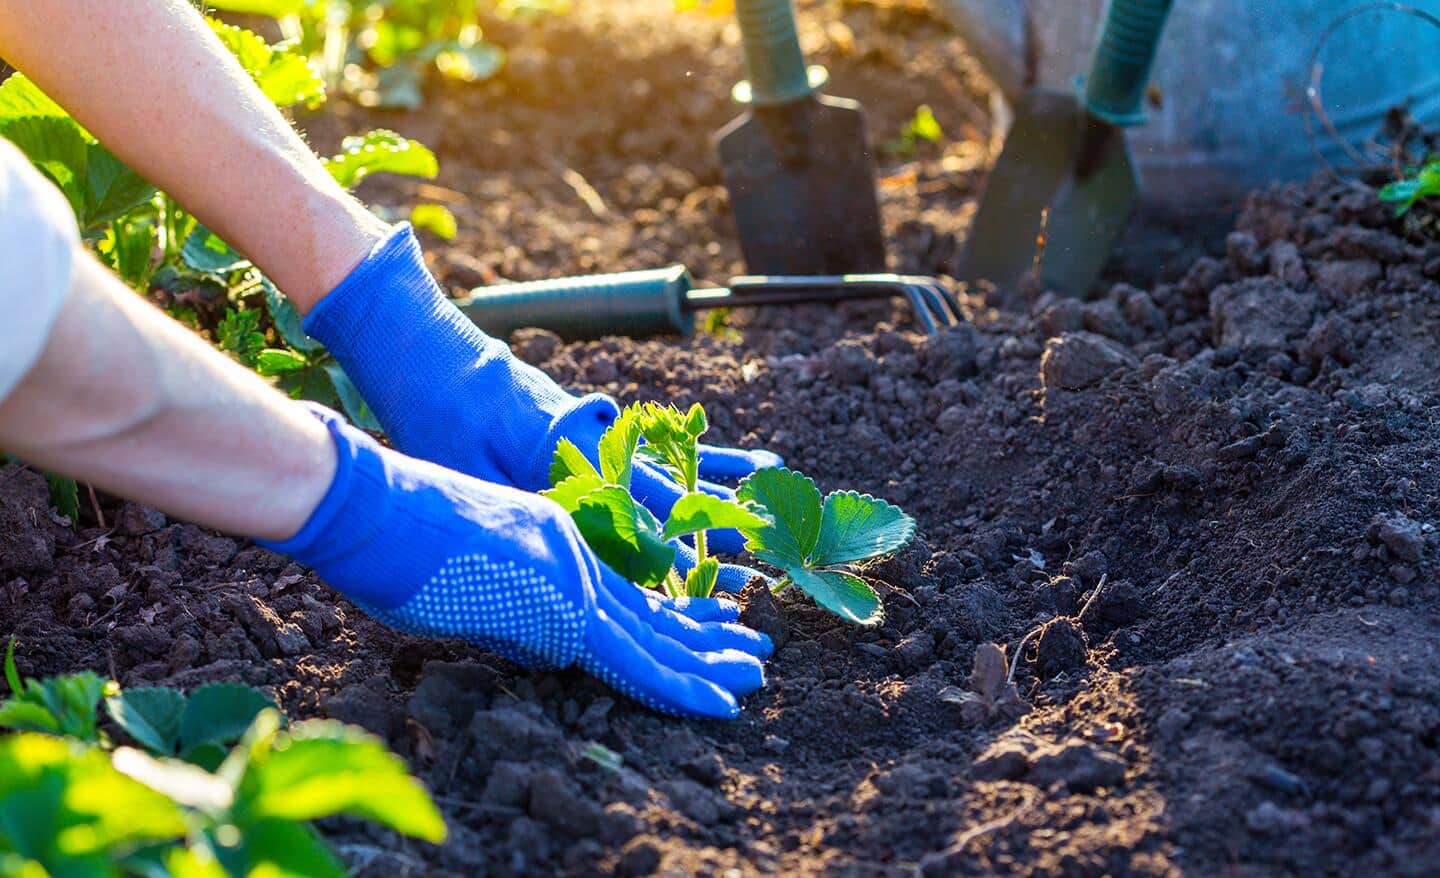 A person wearing gardening gloves places a strawberry plant in a planting hole